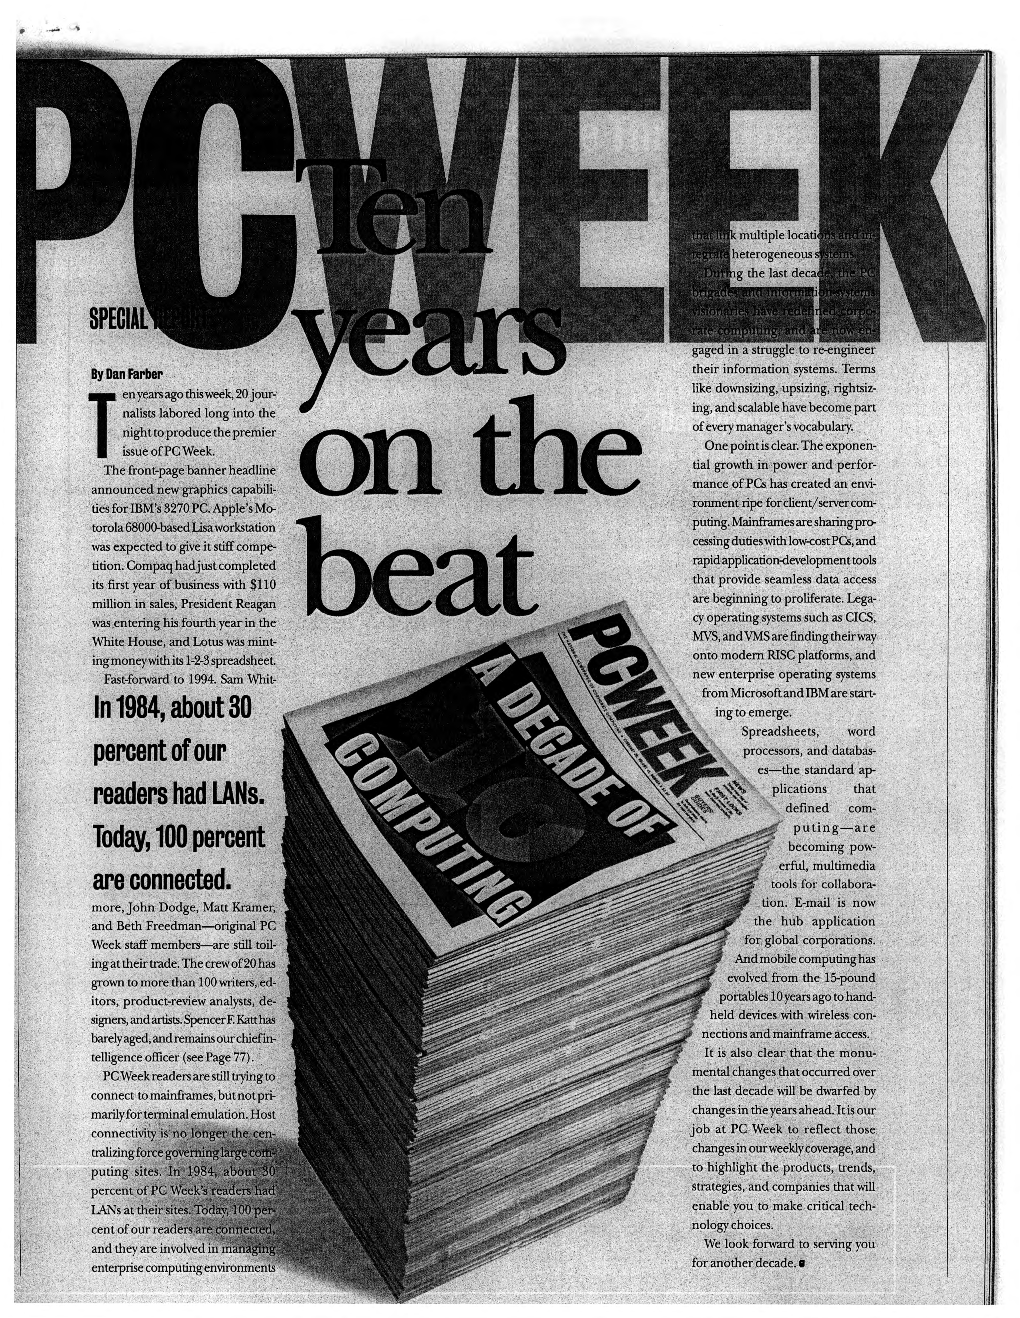 PC Week Special Report Feburary 28, 1994